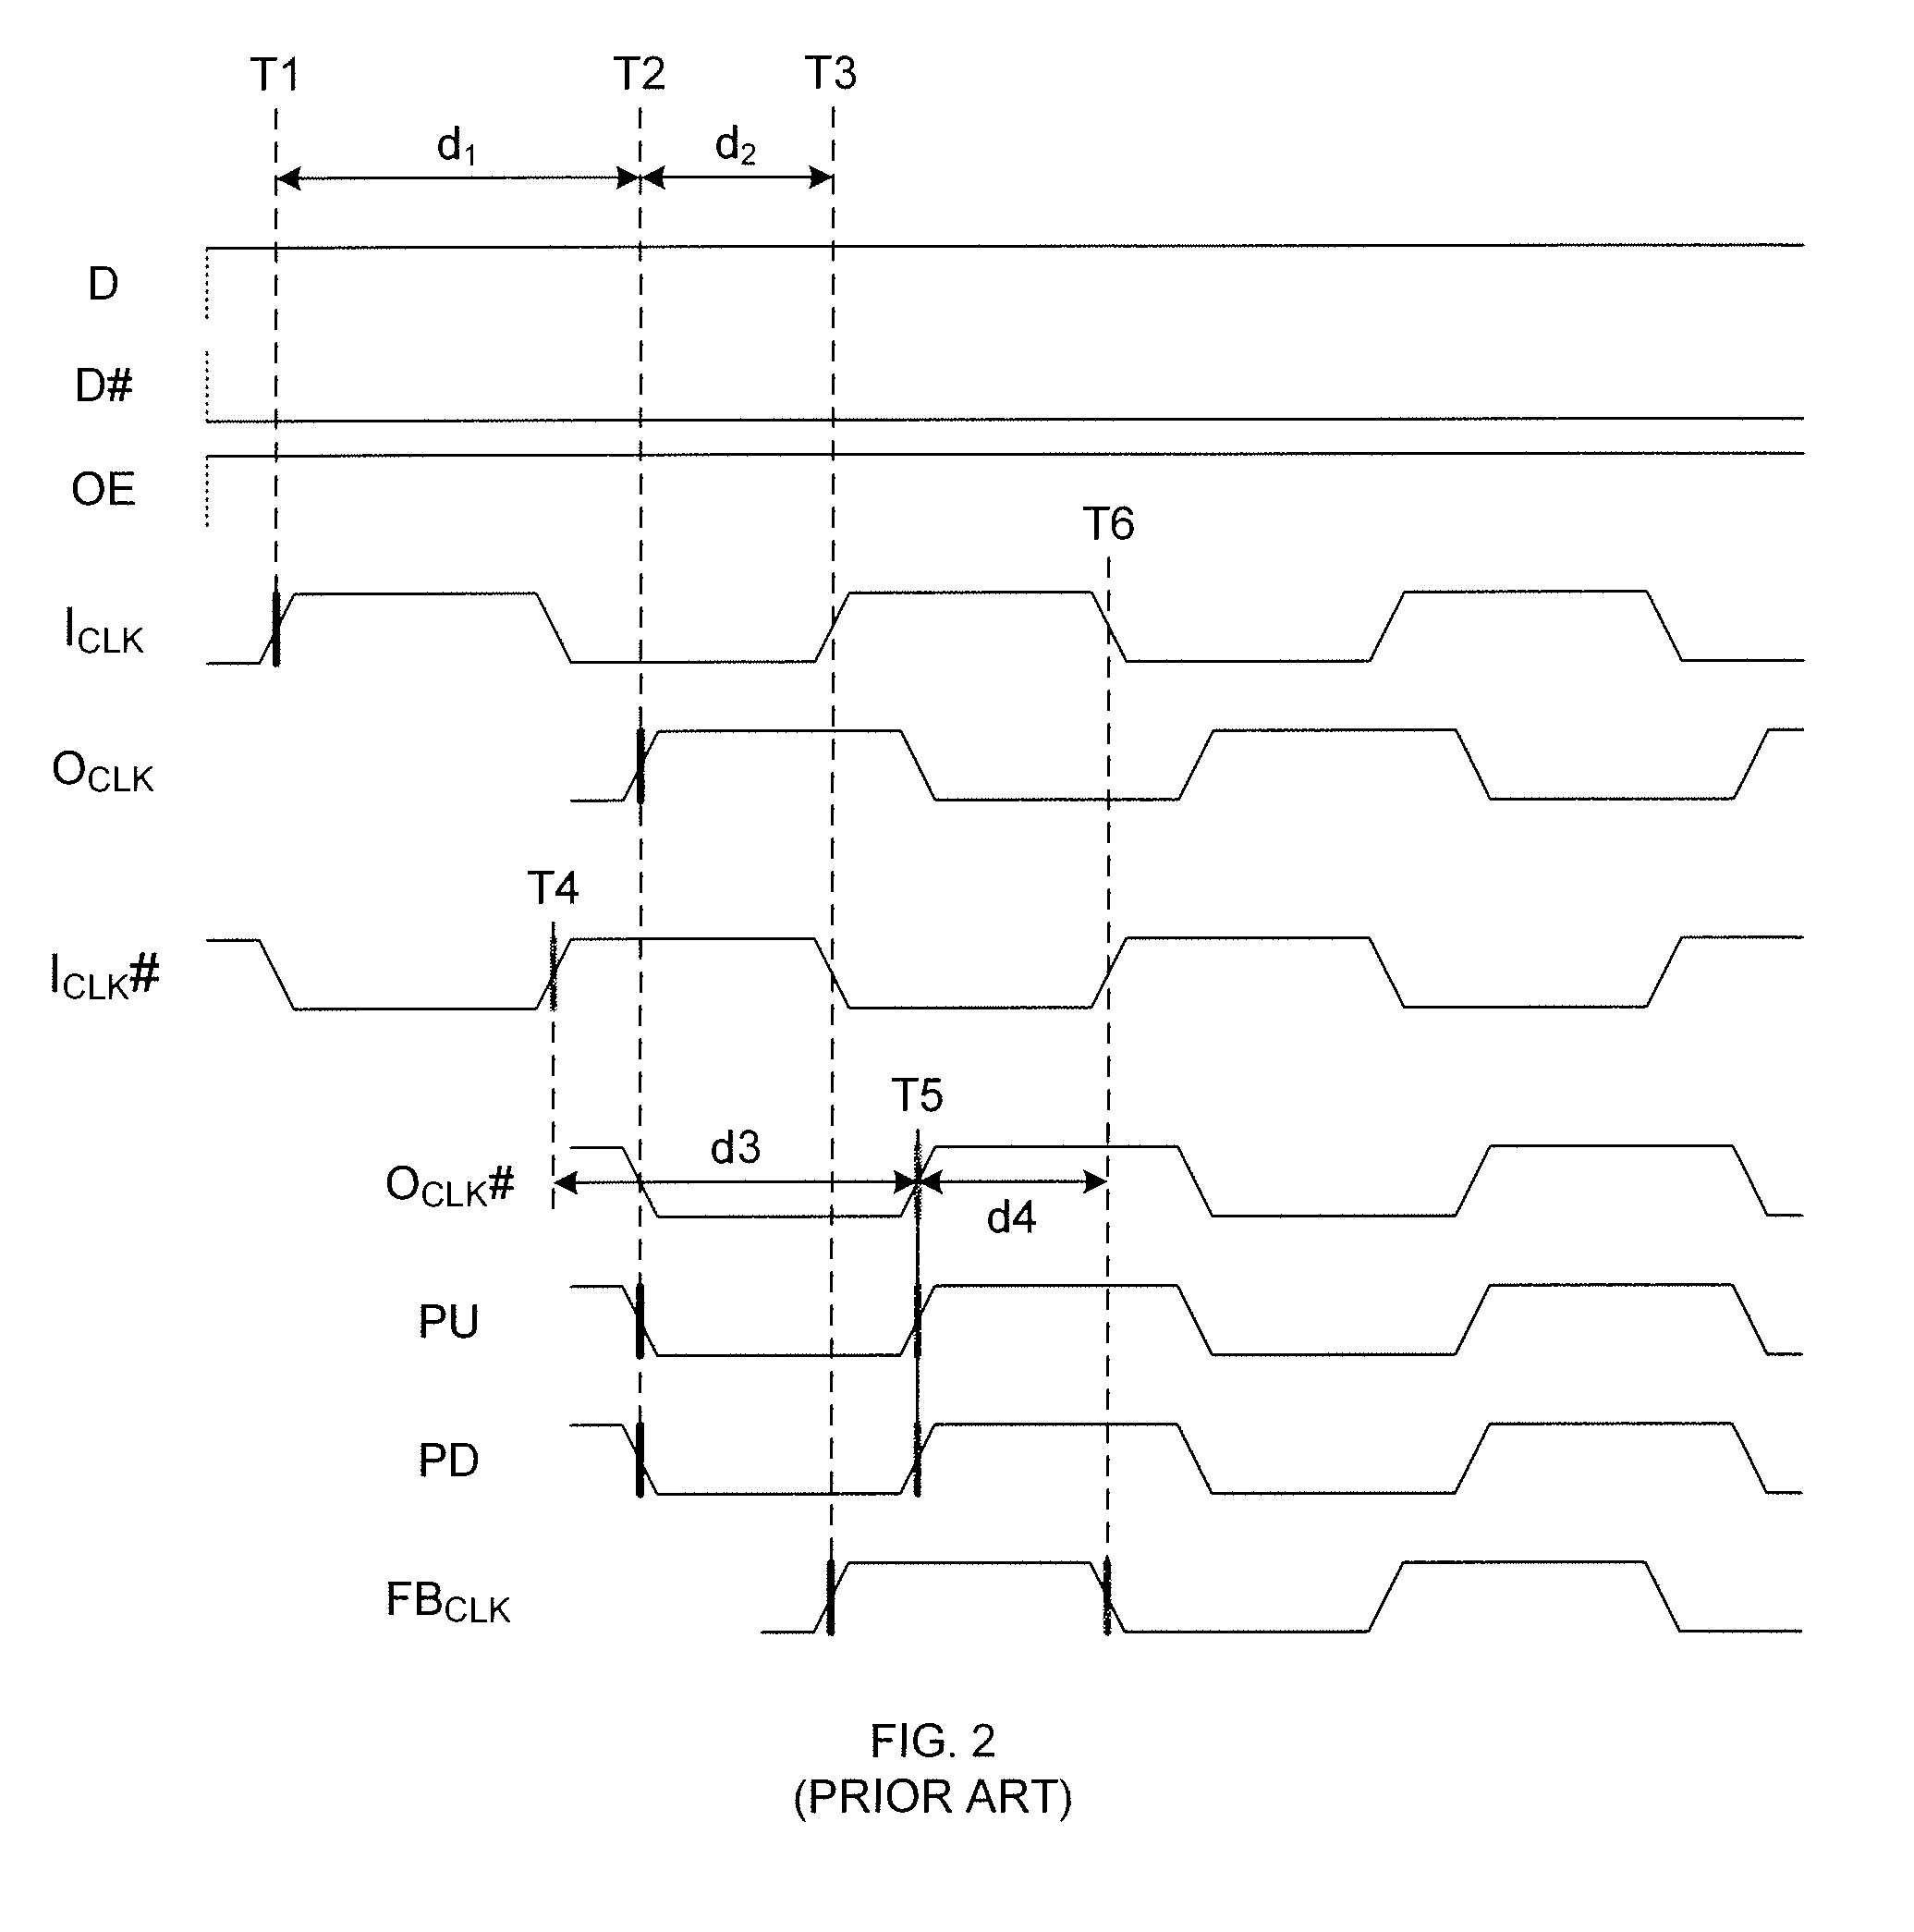 Input termination for delay locked loop feedback with impedance matching